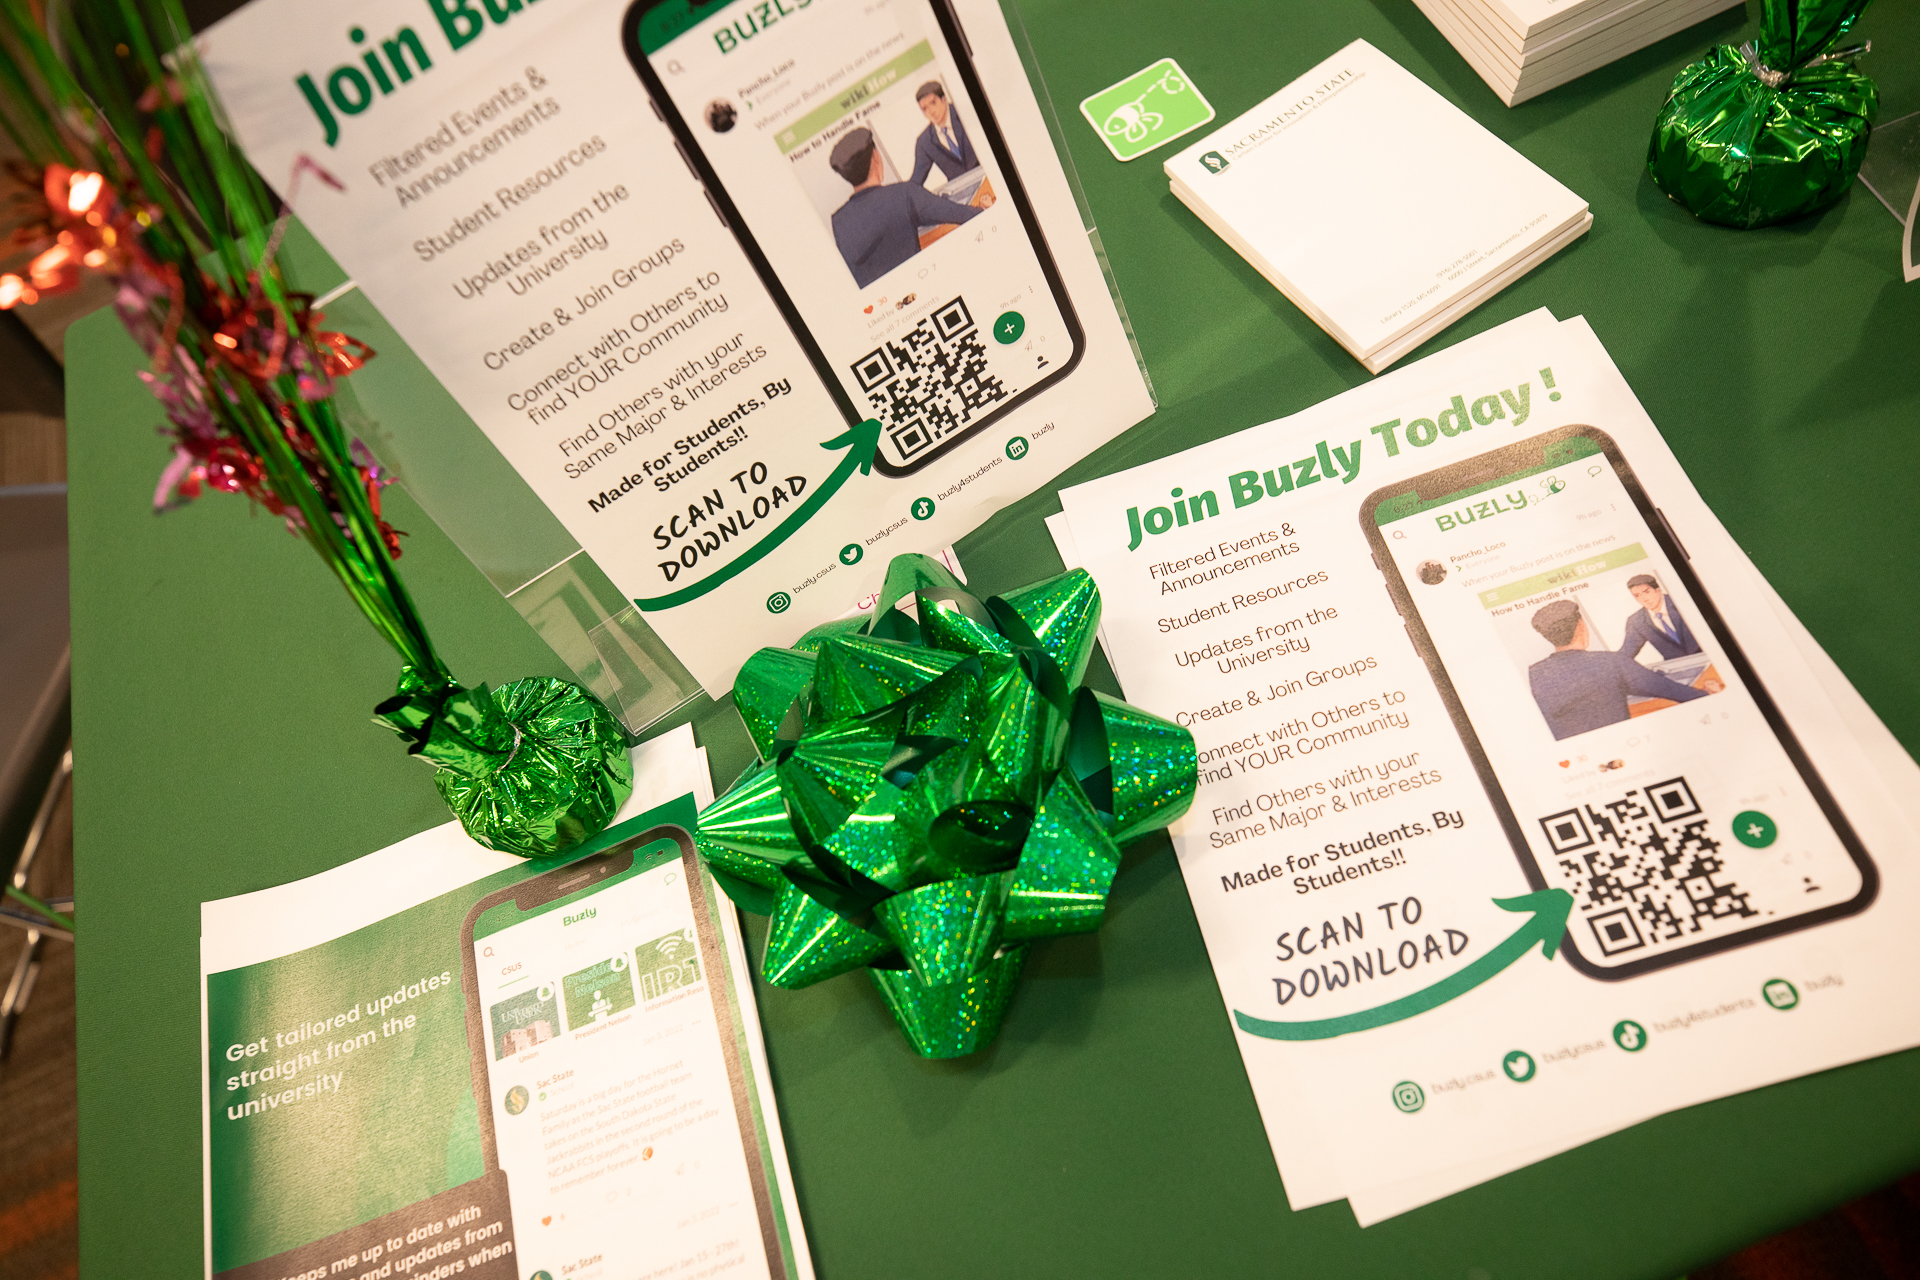 A table with a green tablecloth, with flyers about the Buzly app and decorative items on top